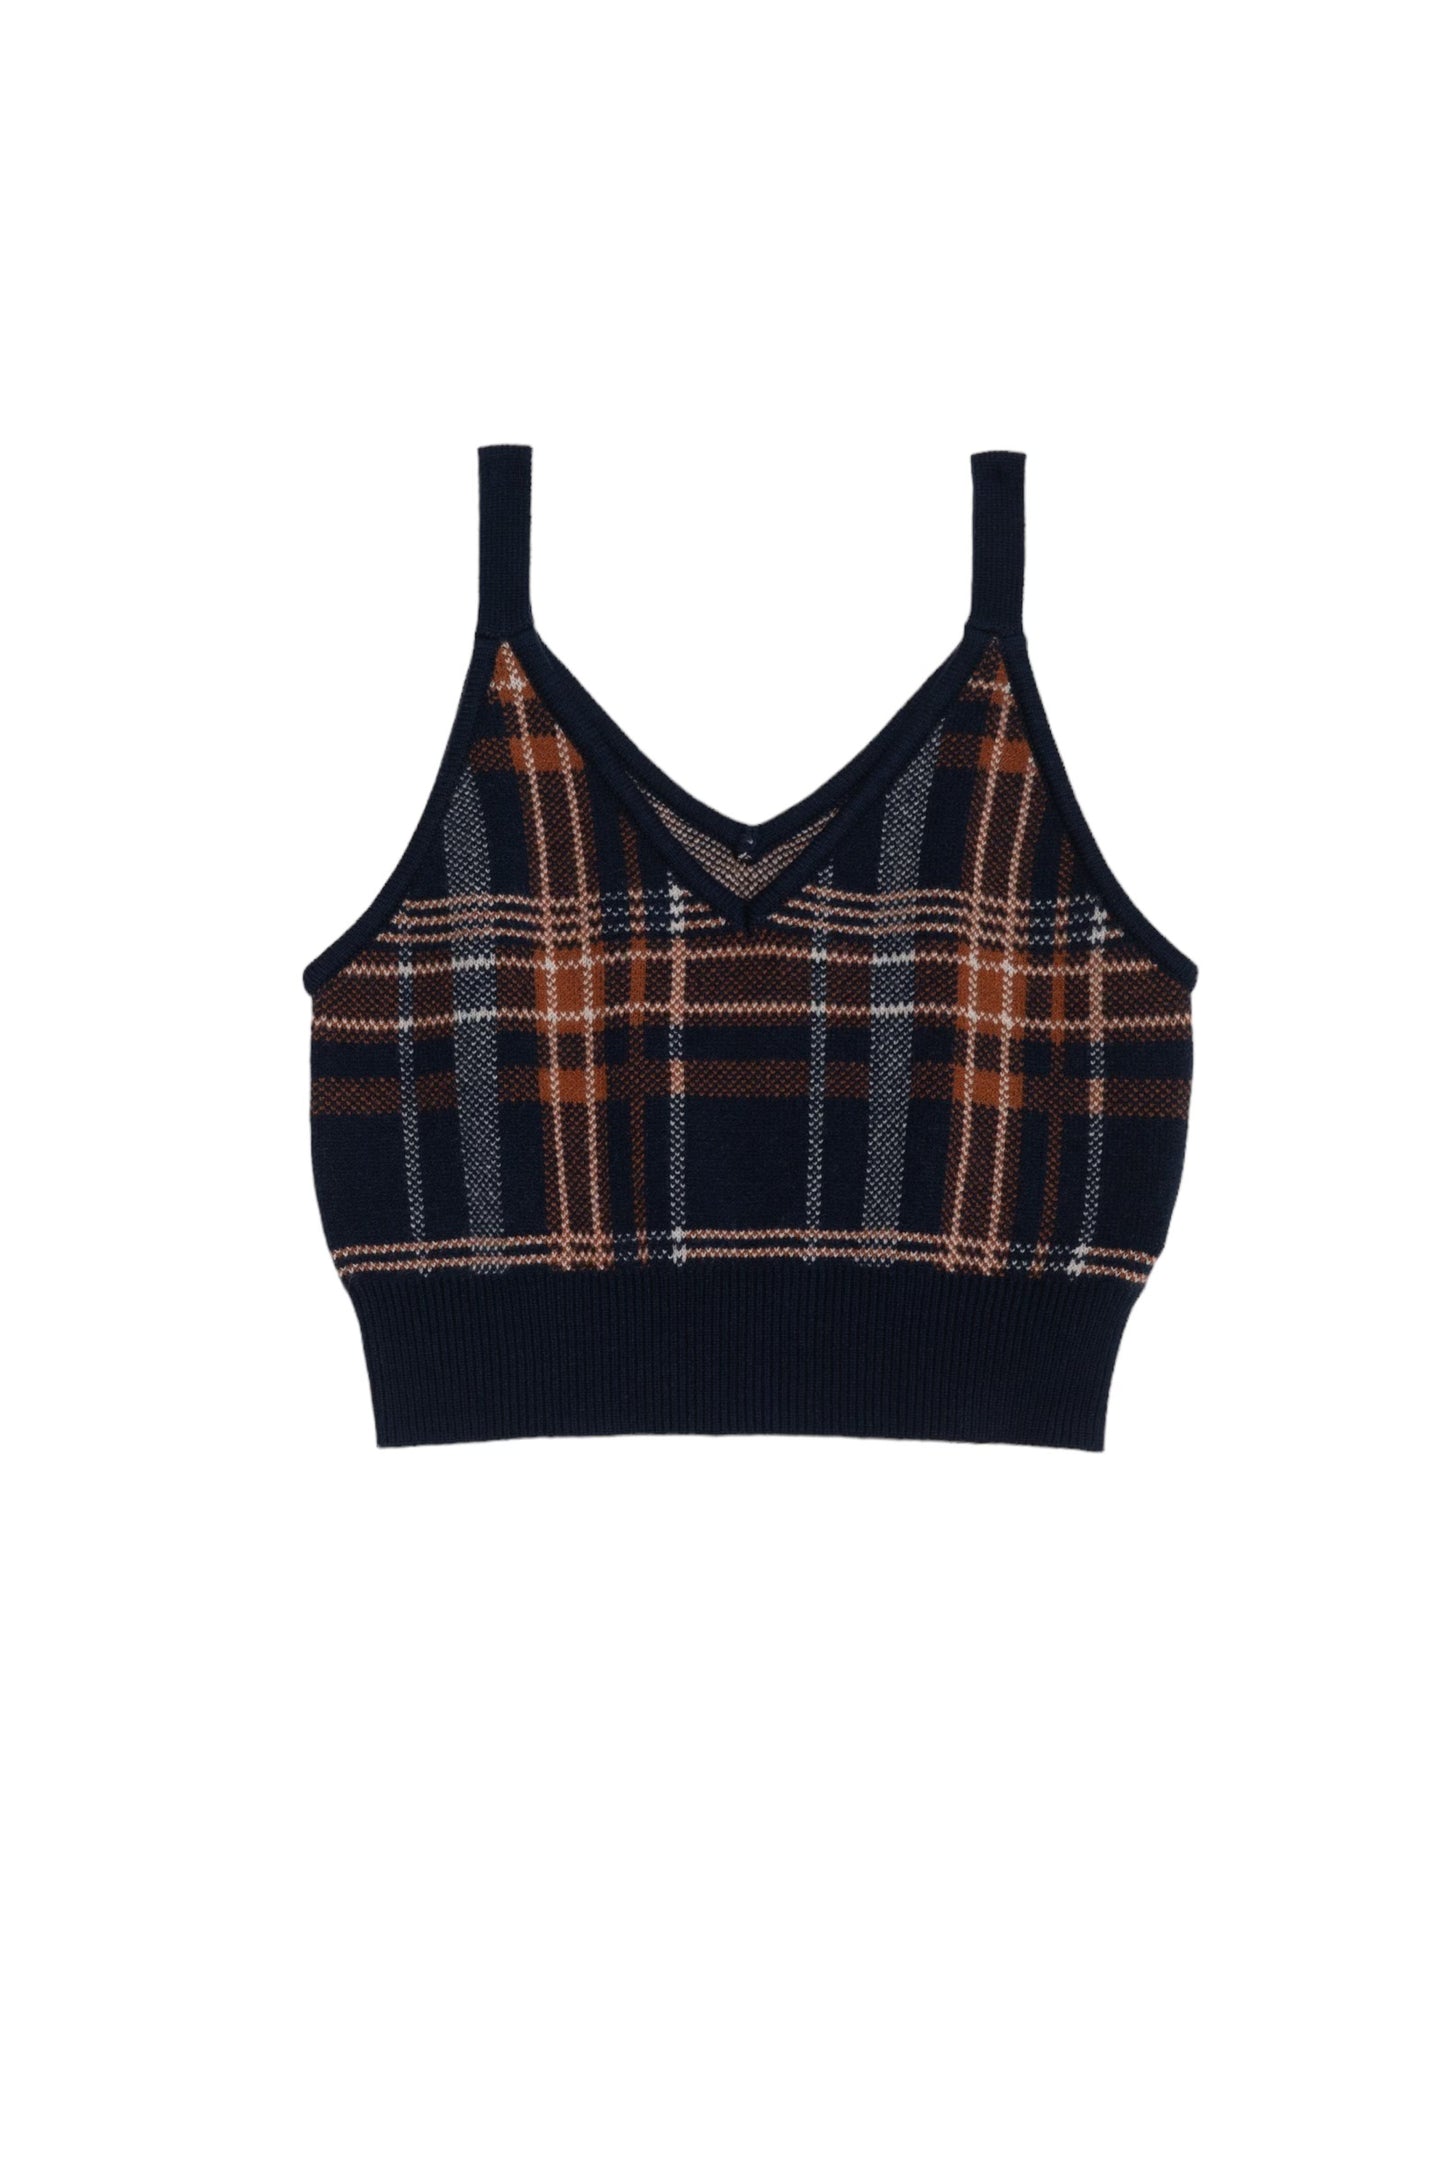 DOUBLE FOUR SIX-Silicon Print Checked Knit Vest Navy Check